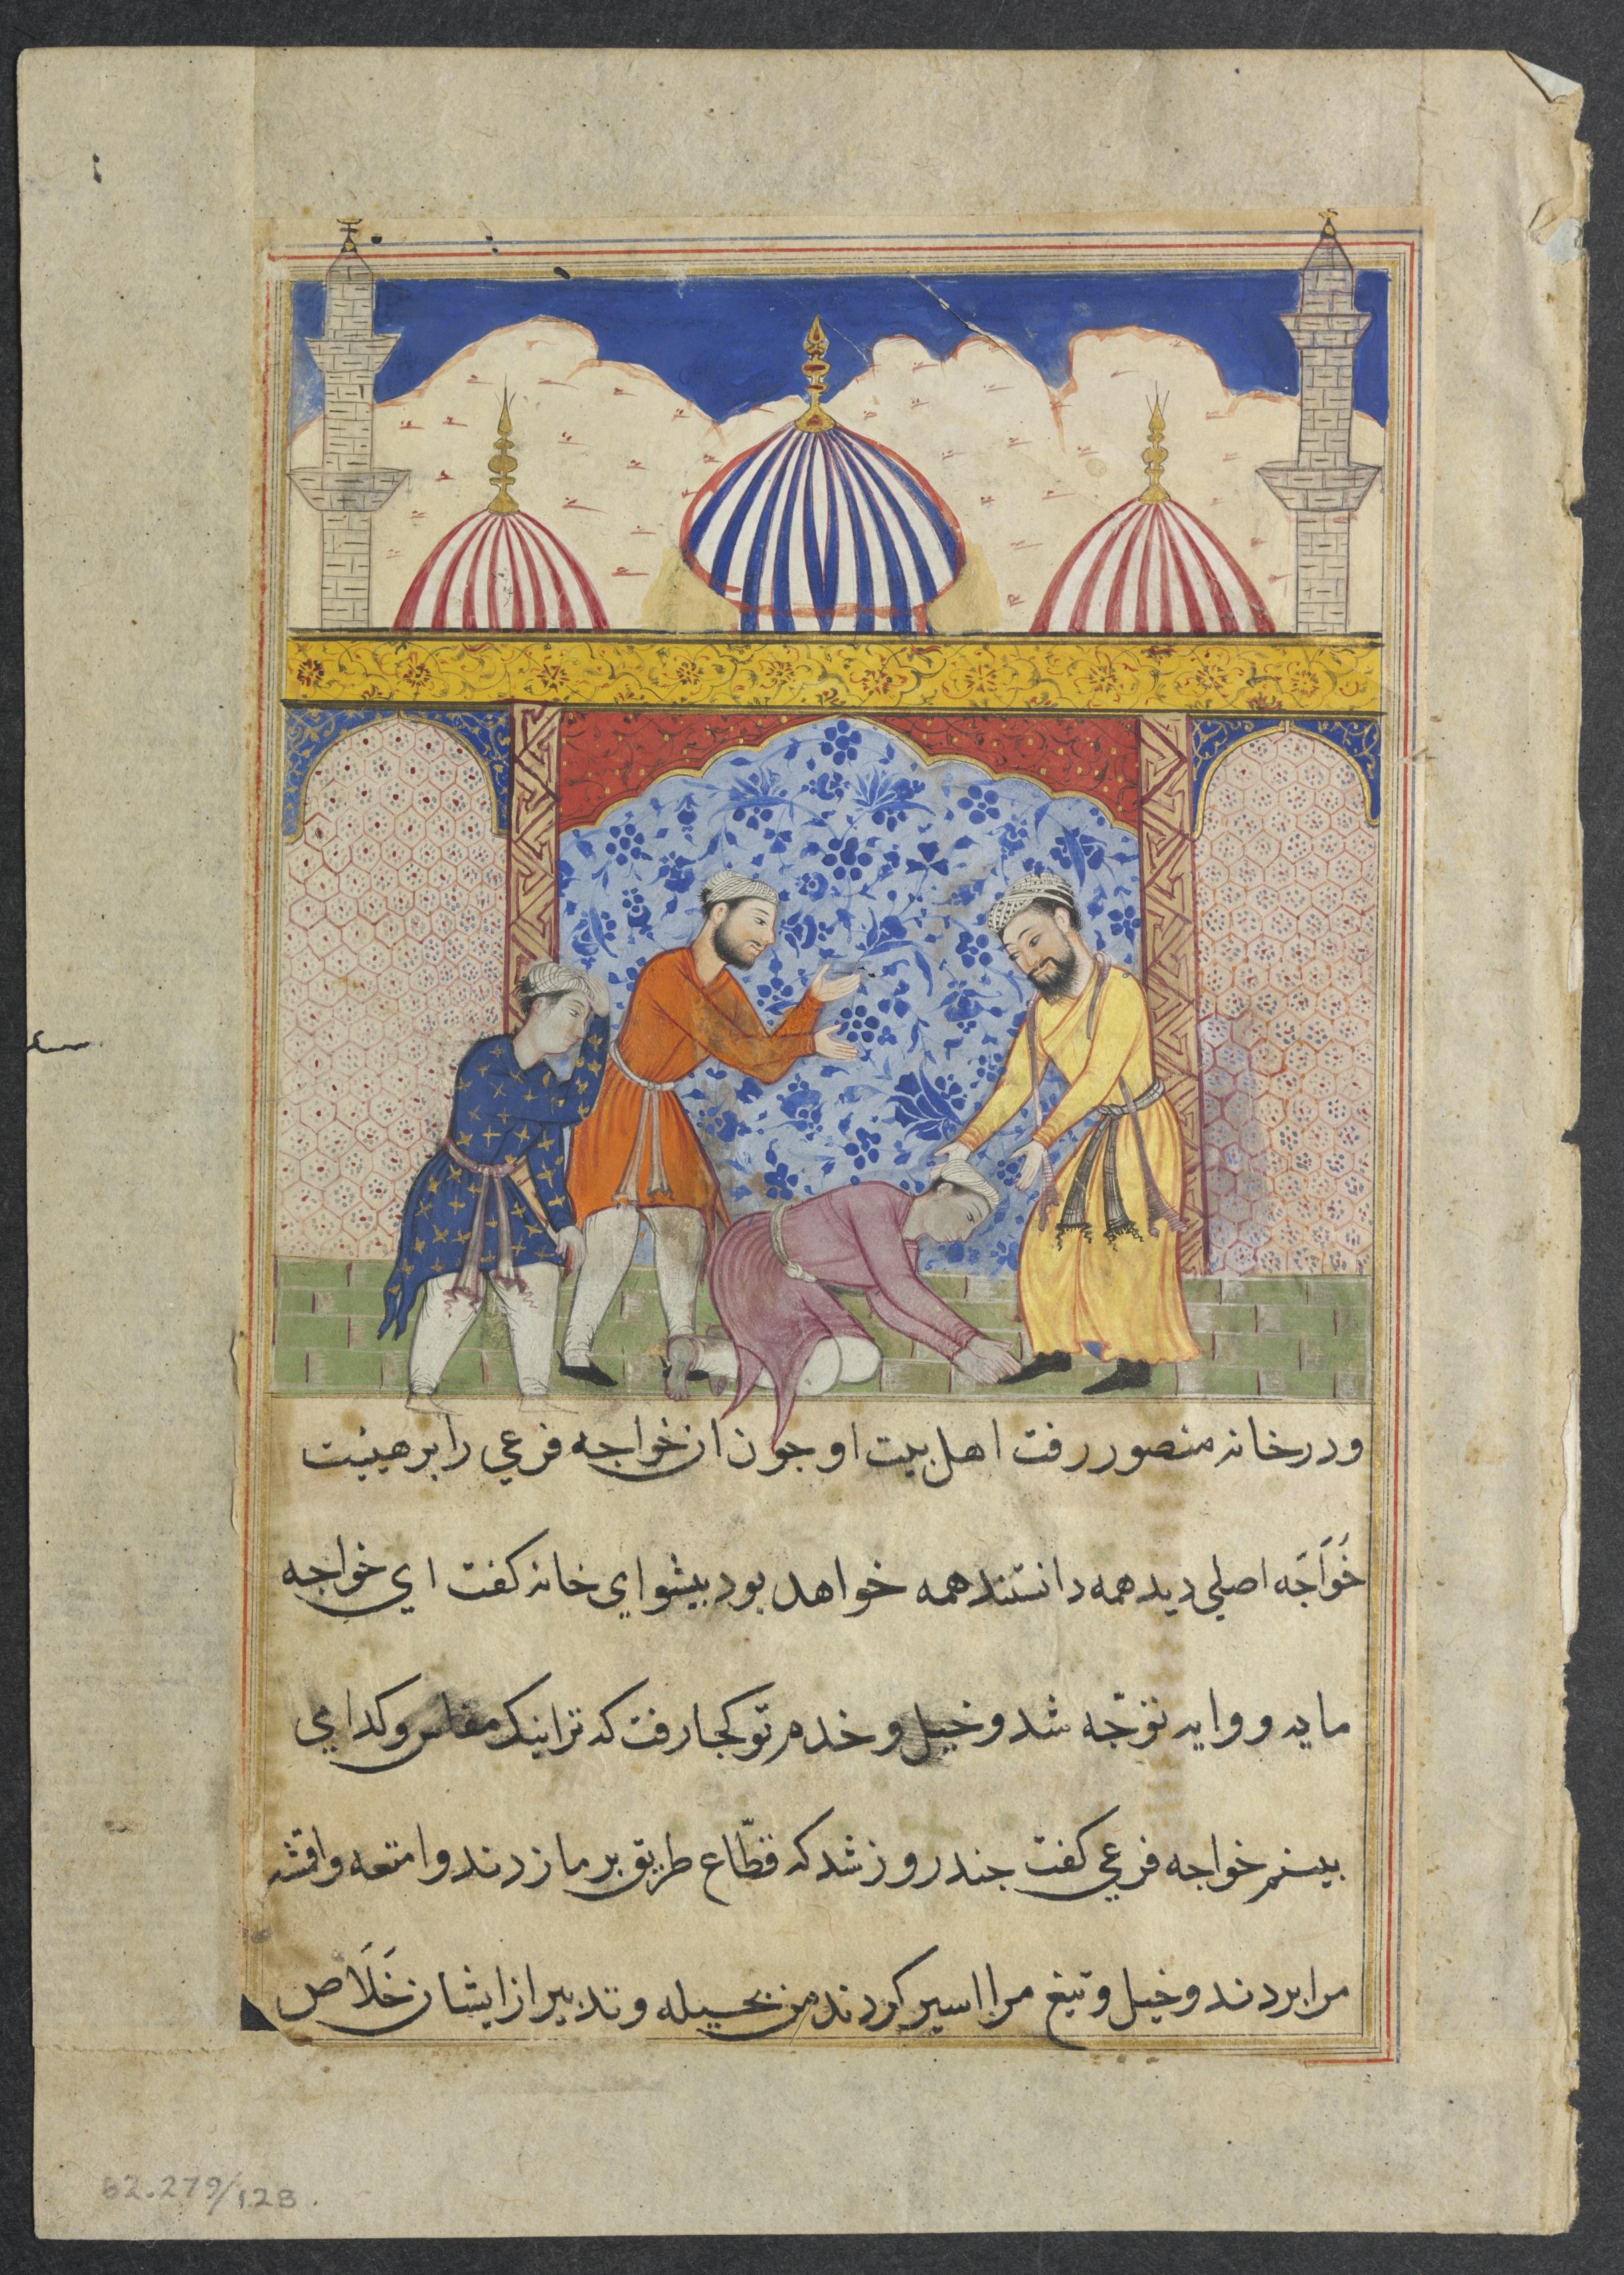 The young man, who has magically taken on the appearance of Mansur the merchant, arrives at his home, from a Tuti-nama (Tales of a Parrot): Seventeenth Night